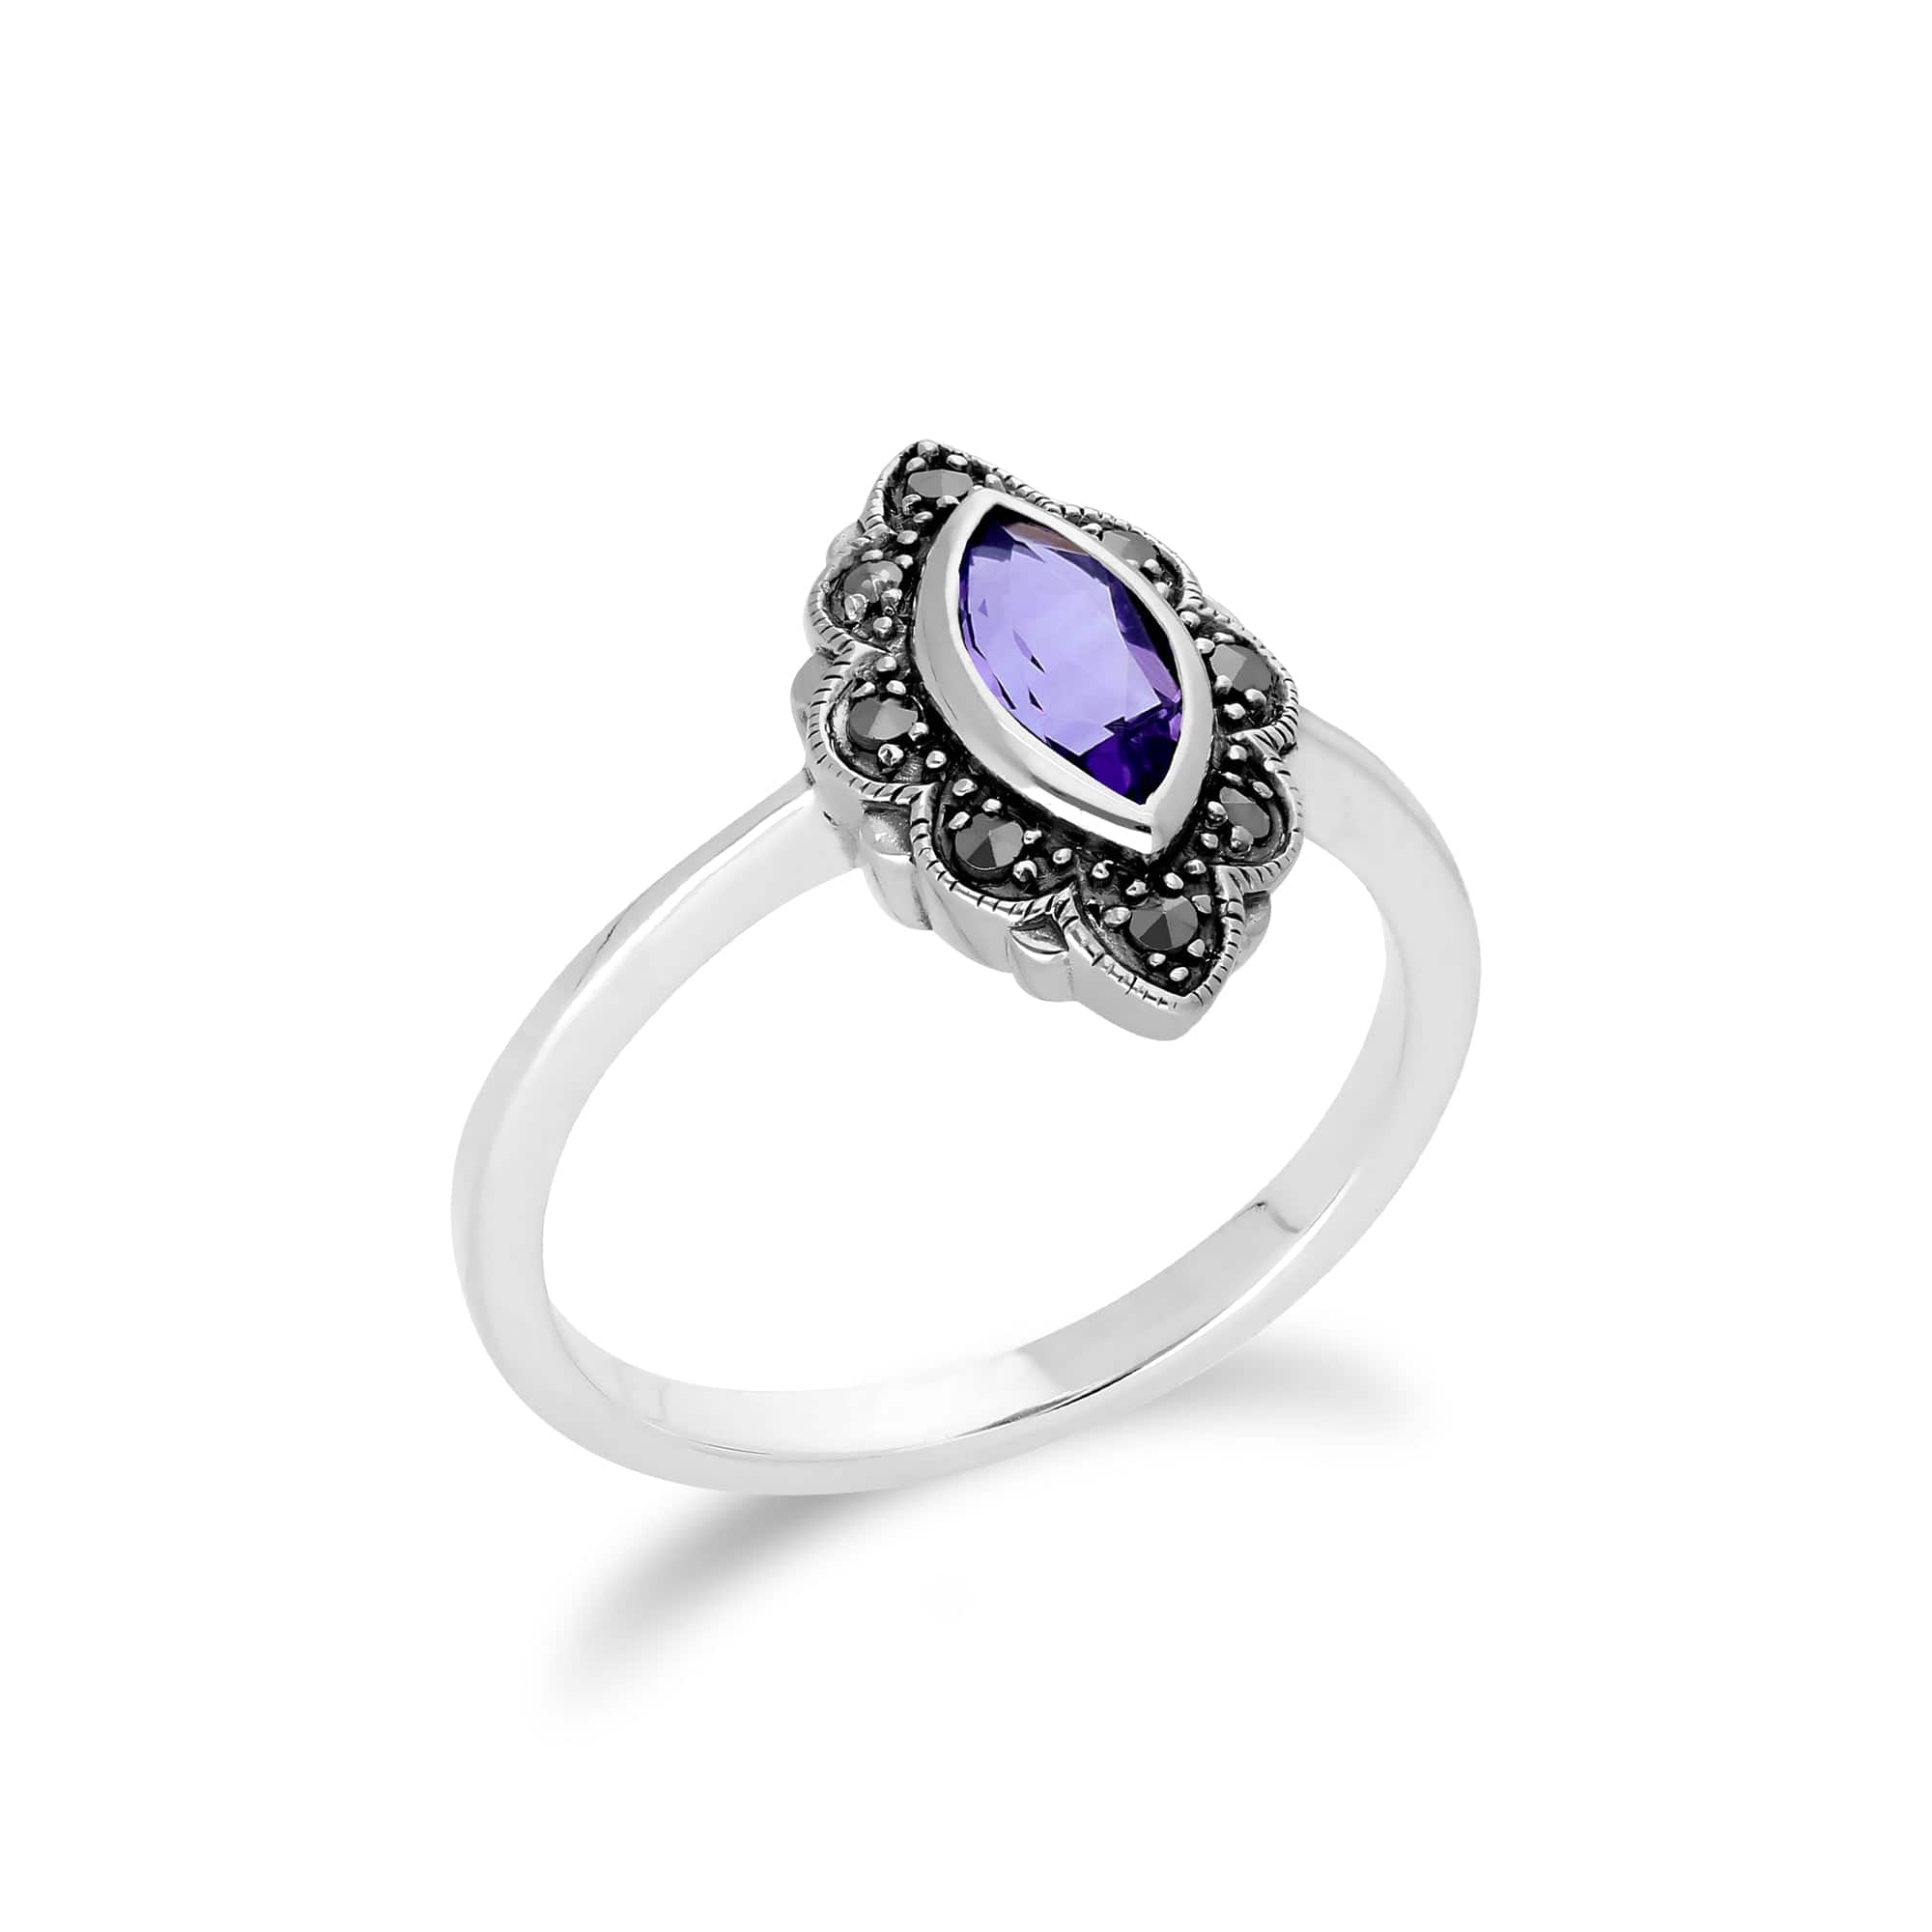 214R597201925 Art Nouveau Marquise Amethyst & Marcasite Leaf Ring in 925 Sterling Silver 2